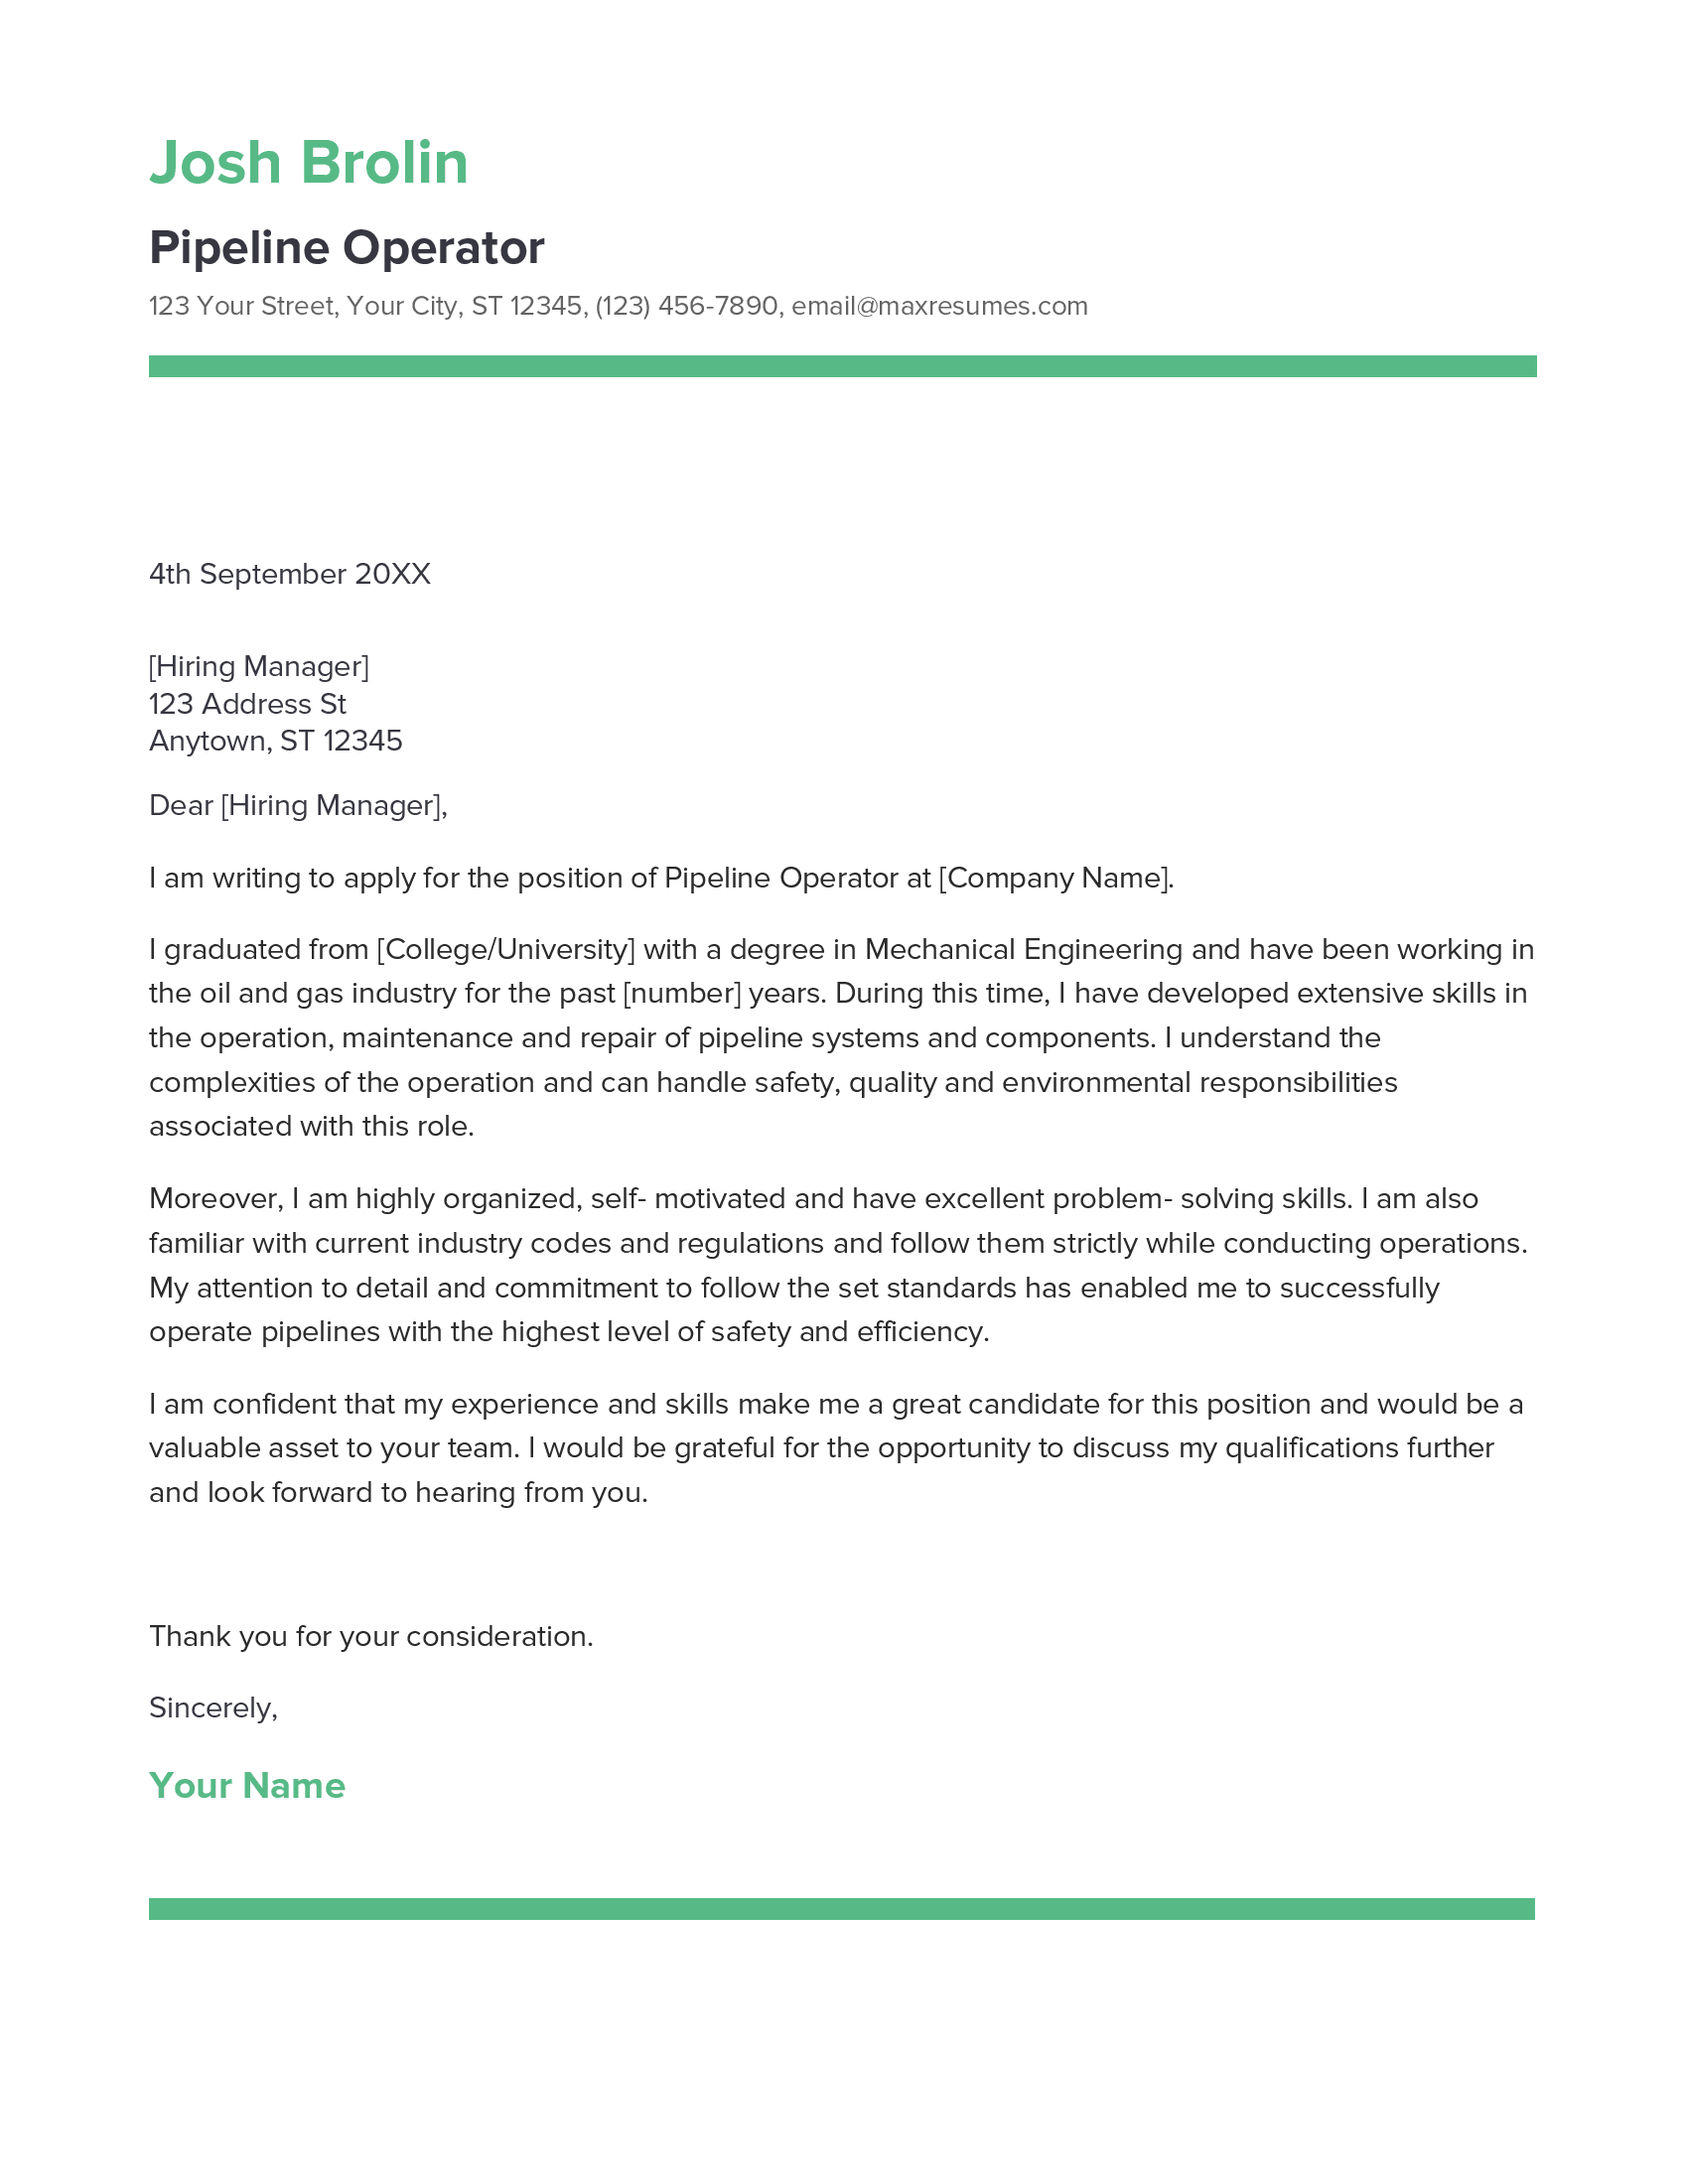 Pipeline Operator Cover Letter Example